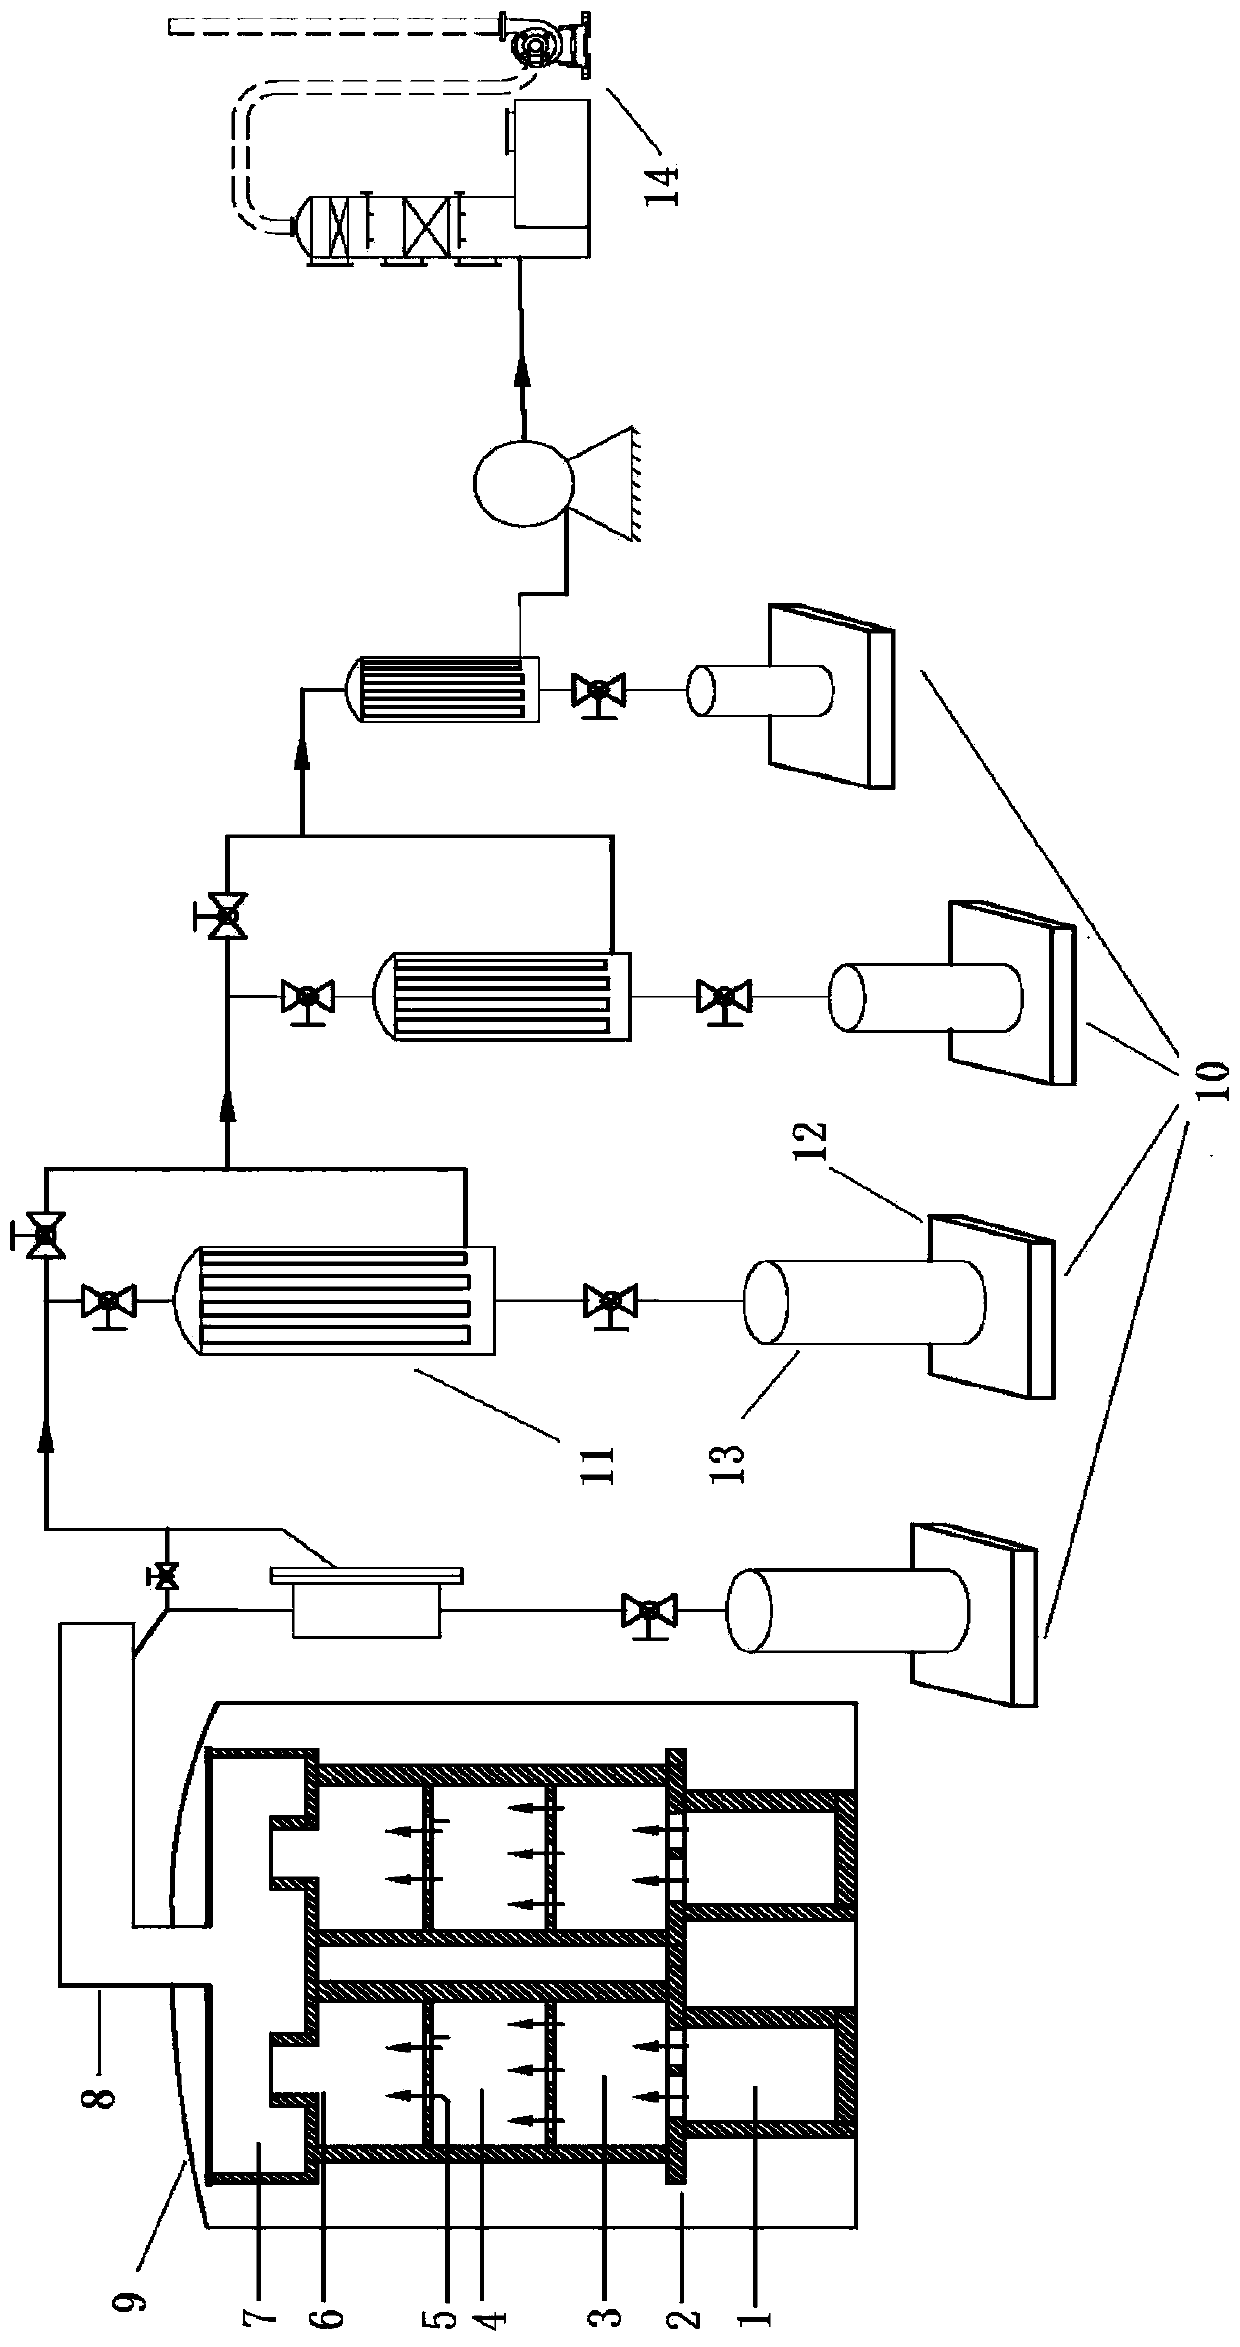 A graphite deposition device for a chemical vapor deposition furnace